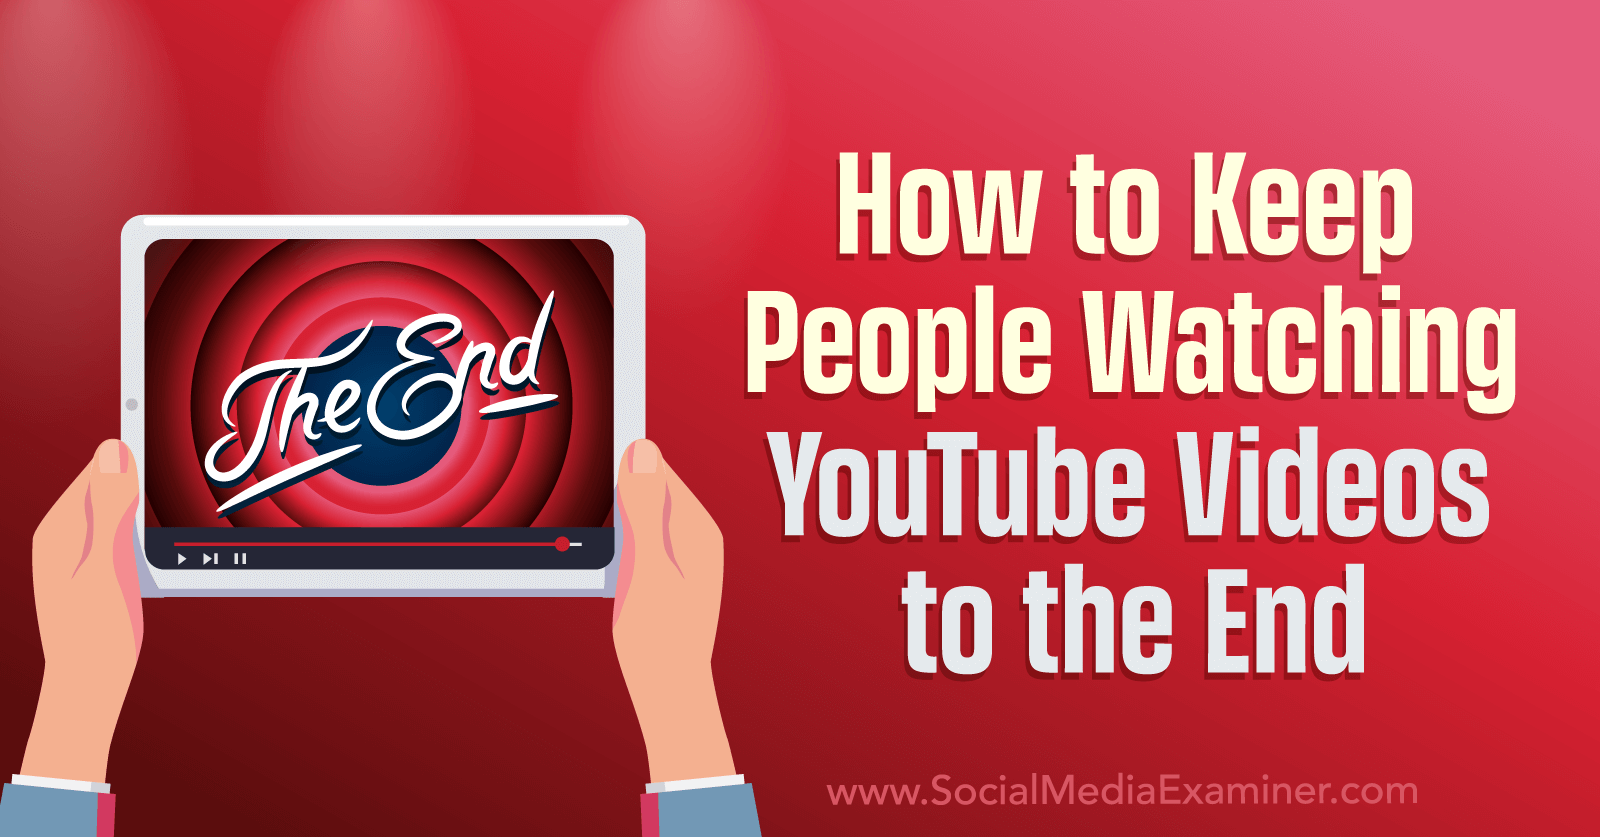 How to Keep People Watching YouTube Videos to the End-Social Media Examiner